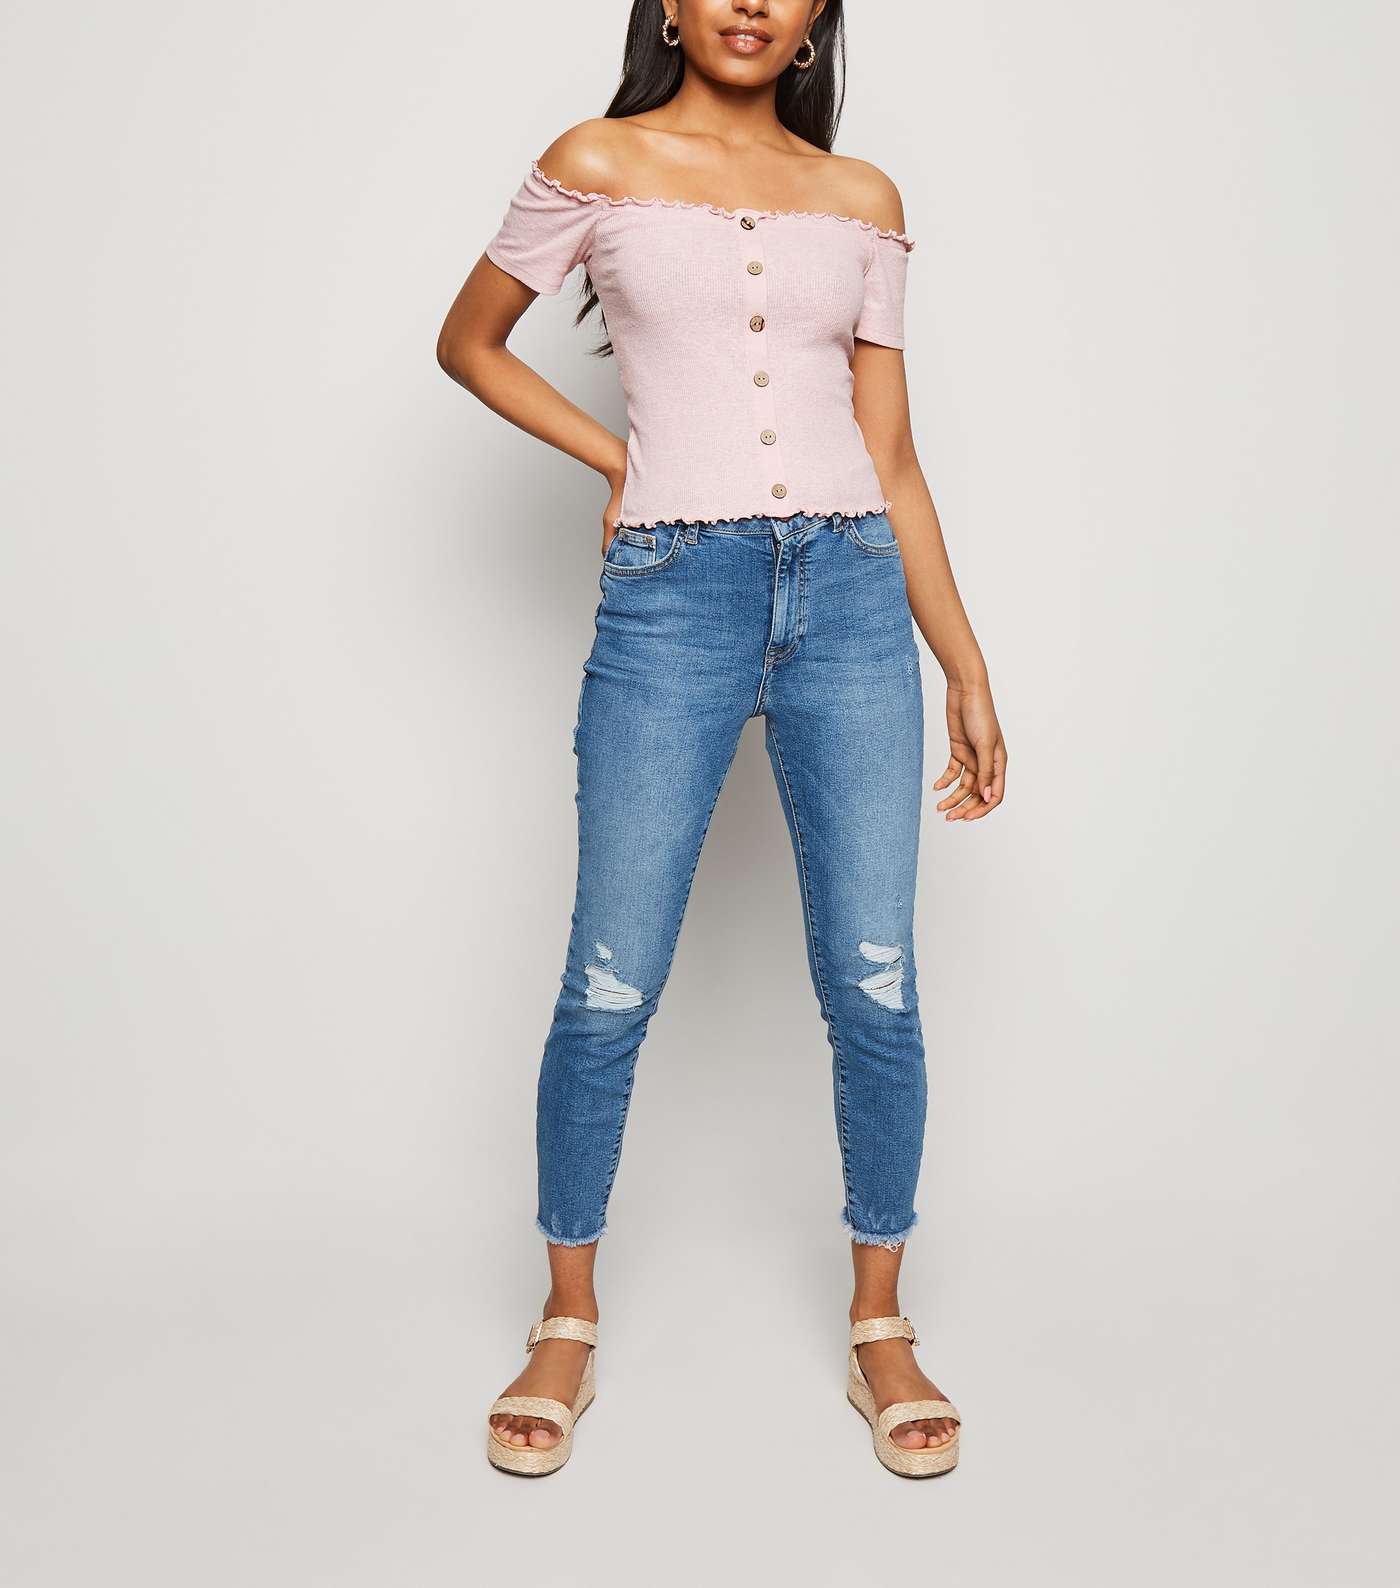 Petite Pink Ribbed Button Front Bardot Top Image 2